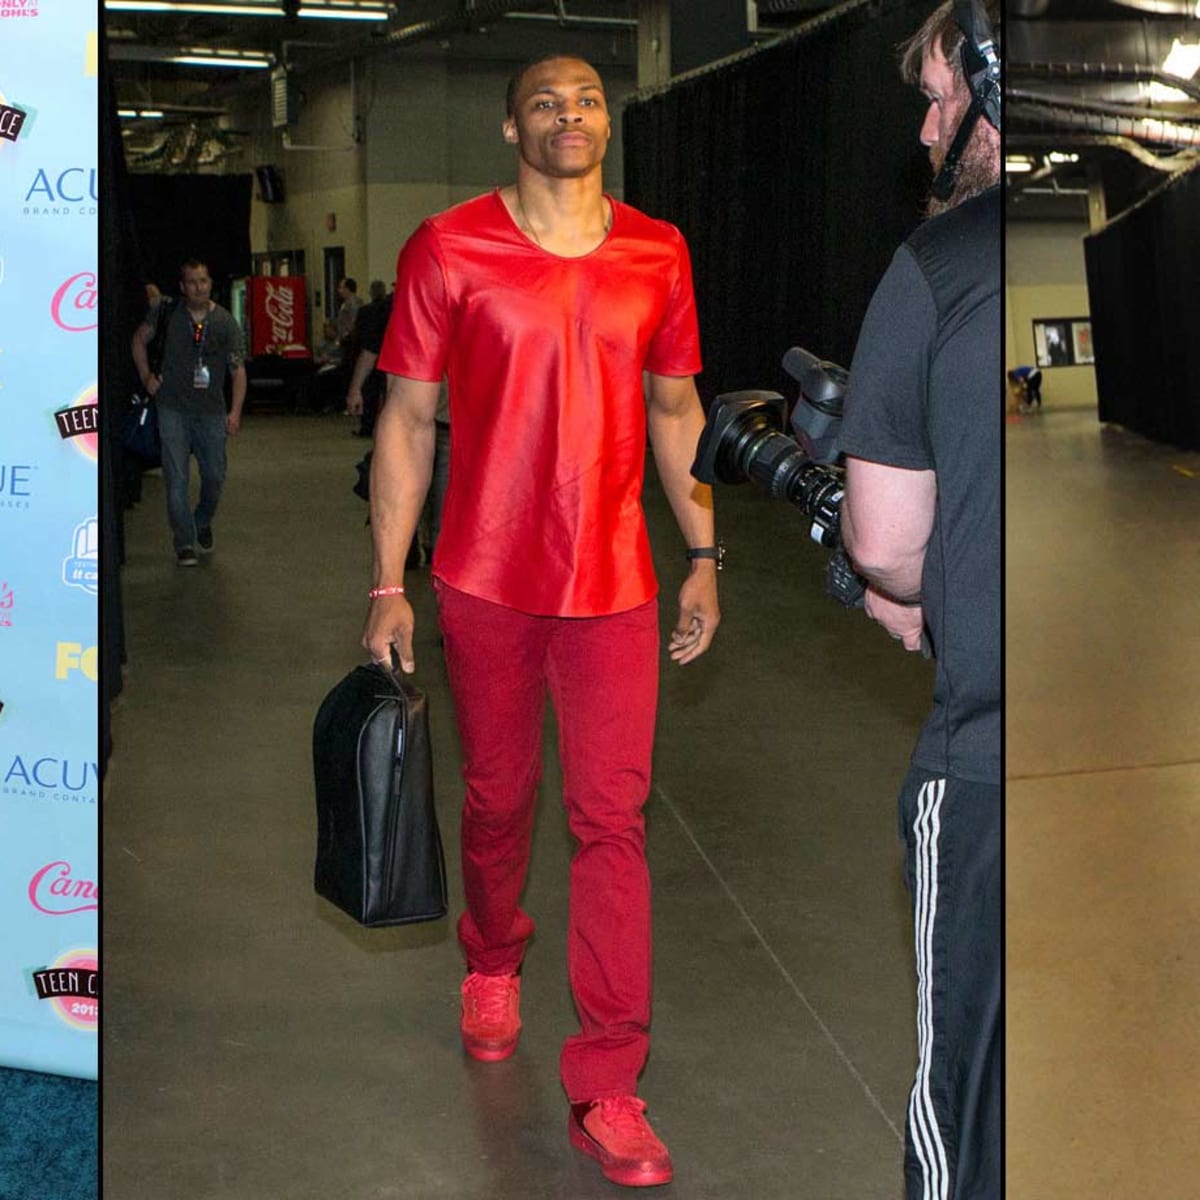 Russell Westbrook NBA fashion, style photos, outfits   Sports ...